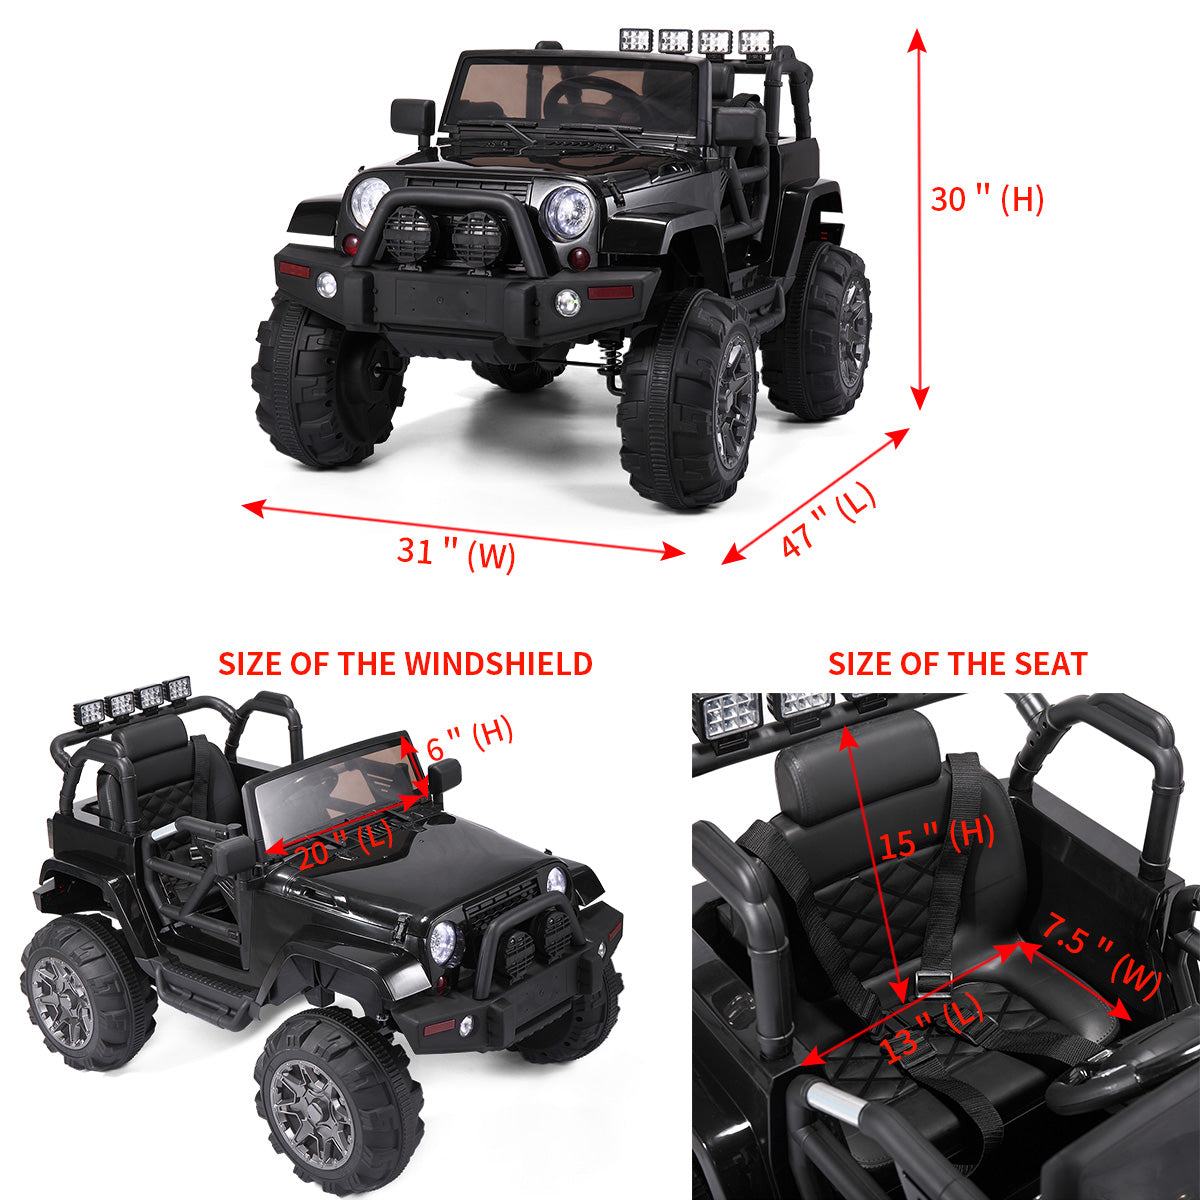 Ride on Cars with Remote Control, 12v Ride on Toys with LED Lights MP3 Player Car Toys, Battery Powered Riding Toys, Kids Party Gift, Black, LJ1146